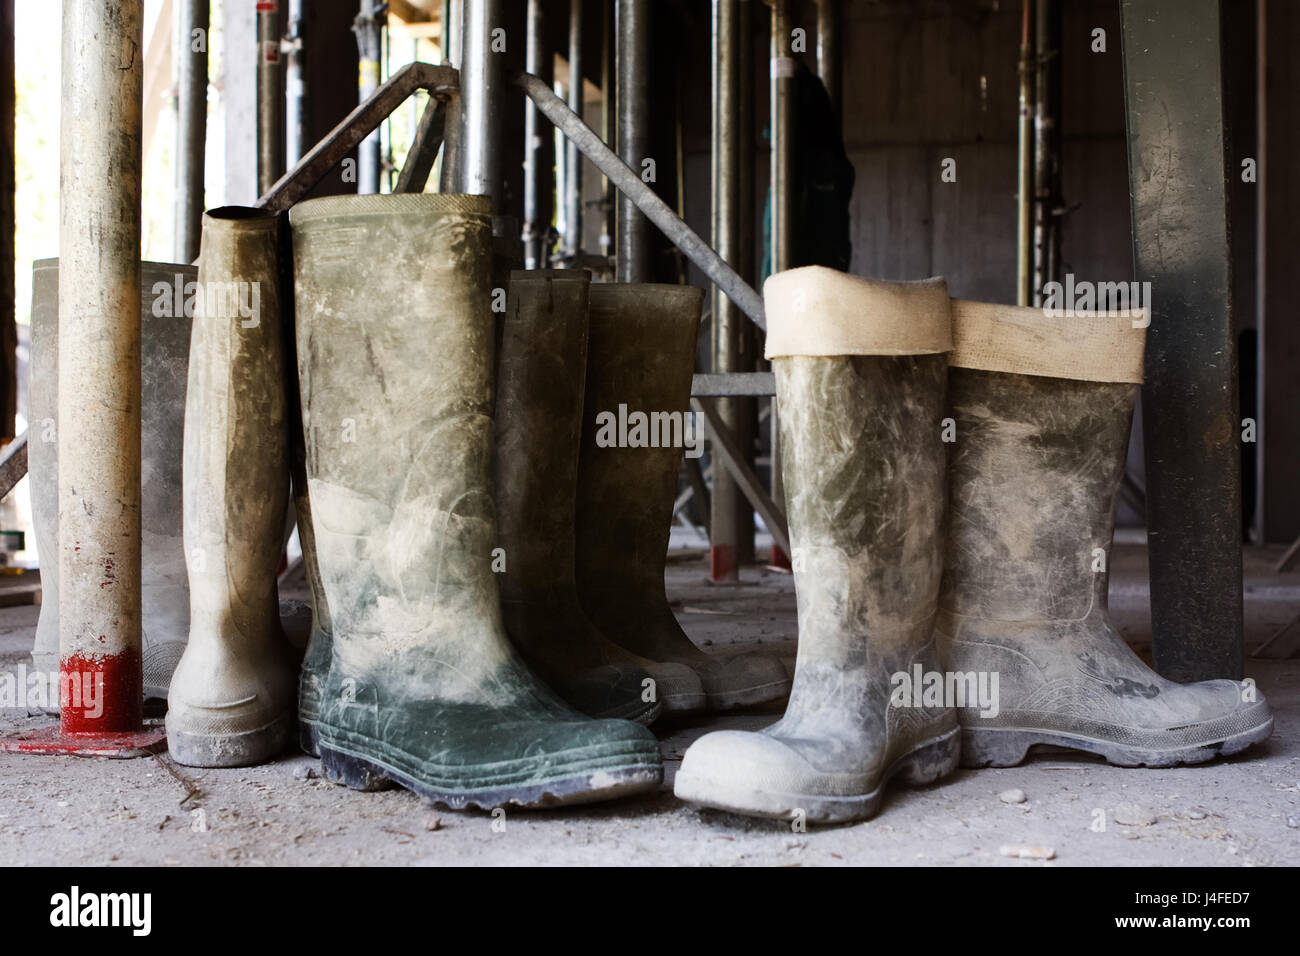 Dirty galoshes (rubber boots) at a construction site. Stock Photo